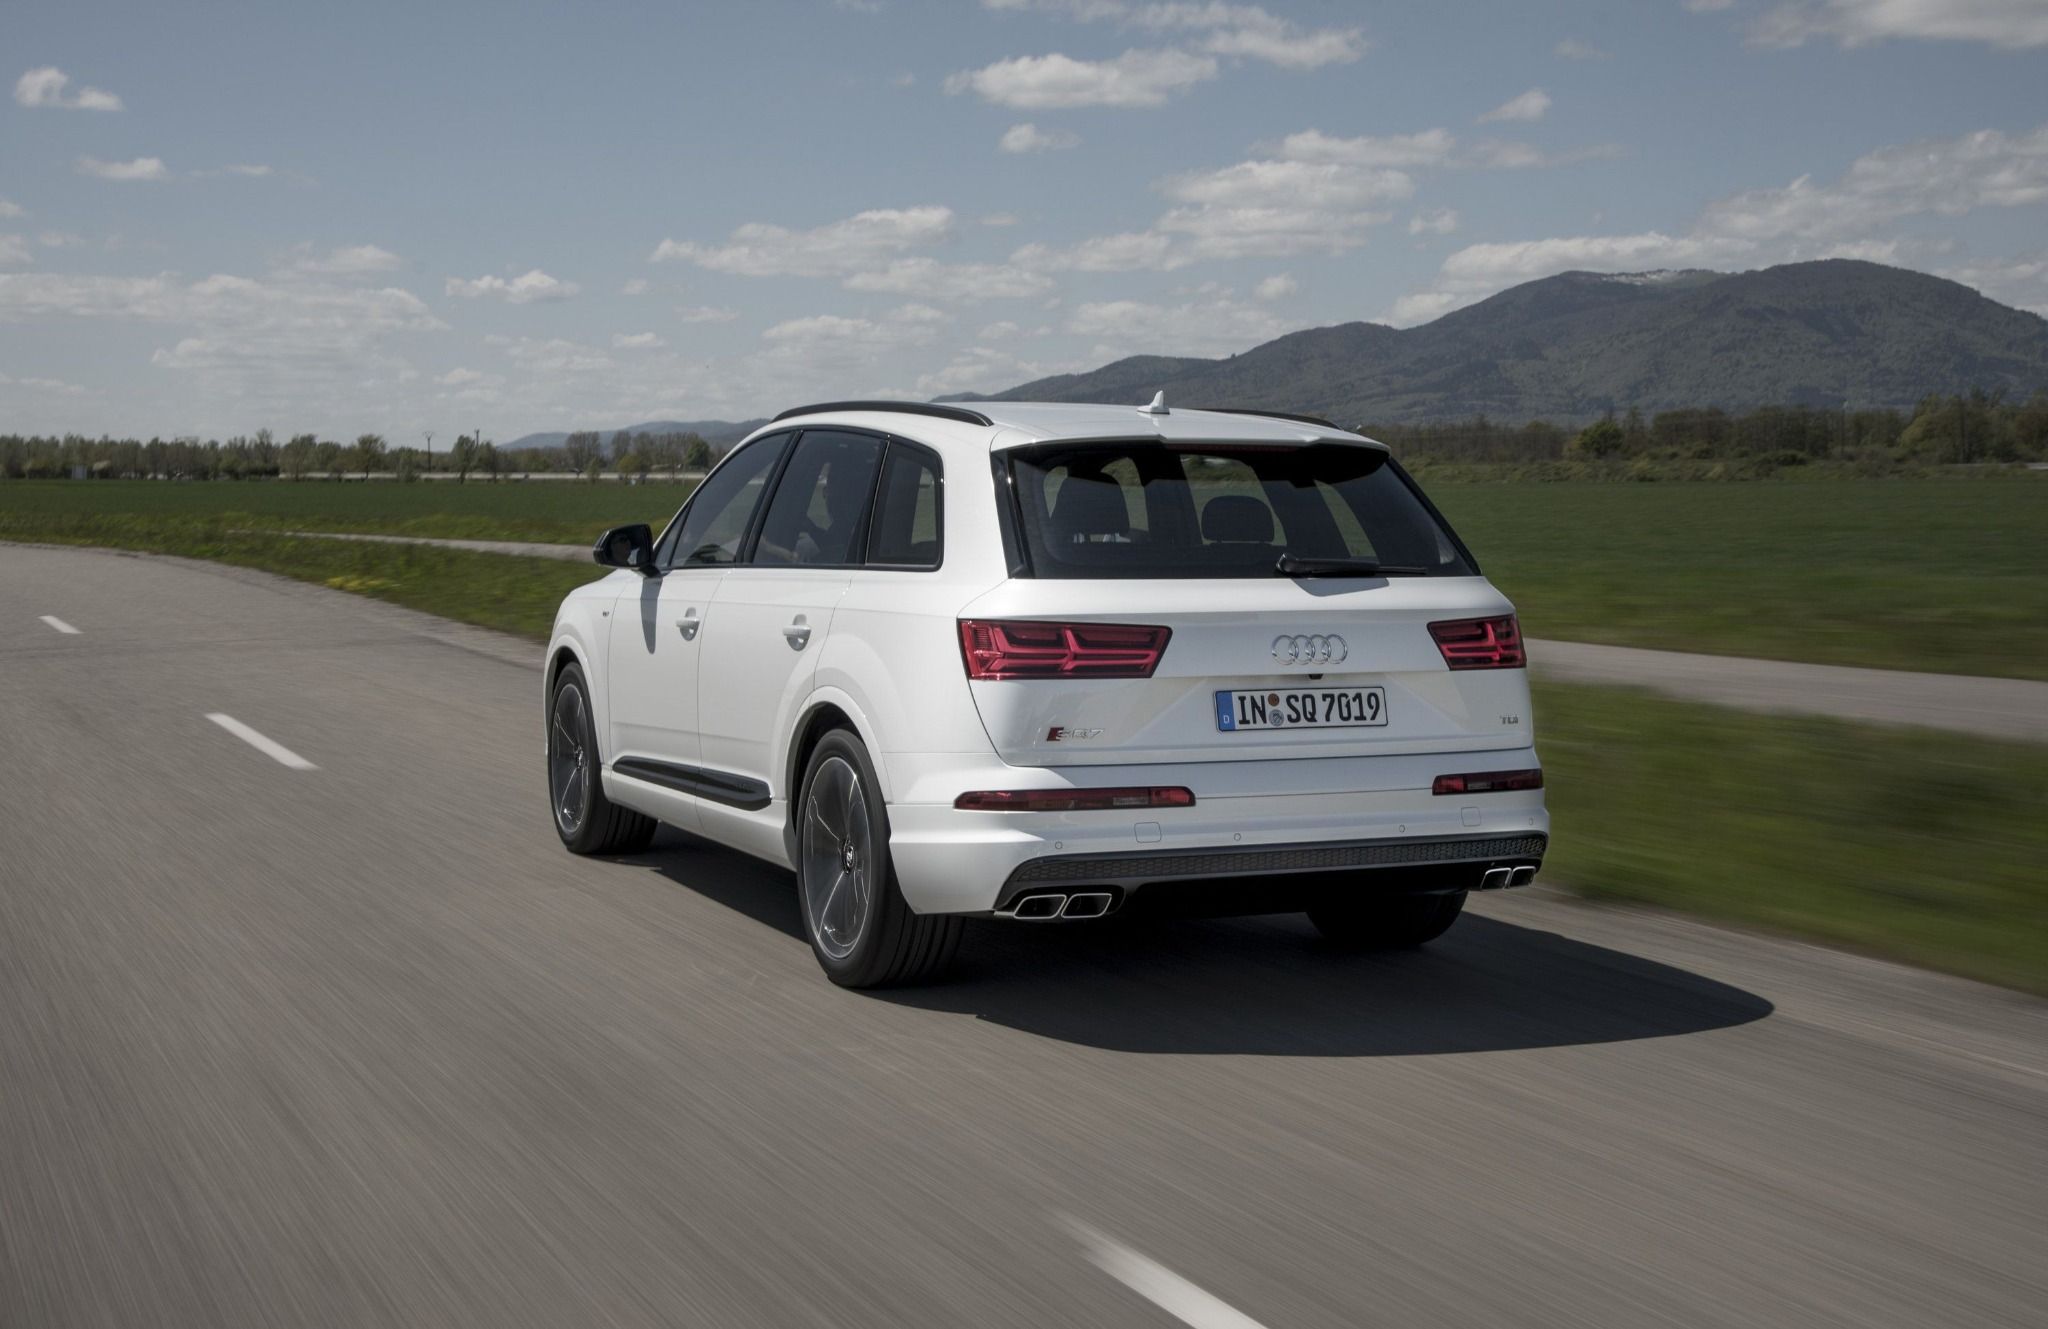 rear of white sq7 driving on a road